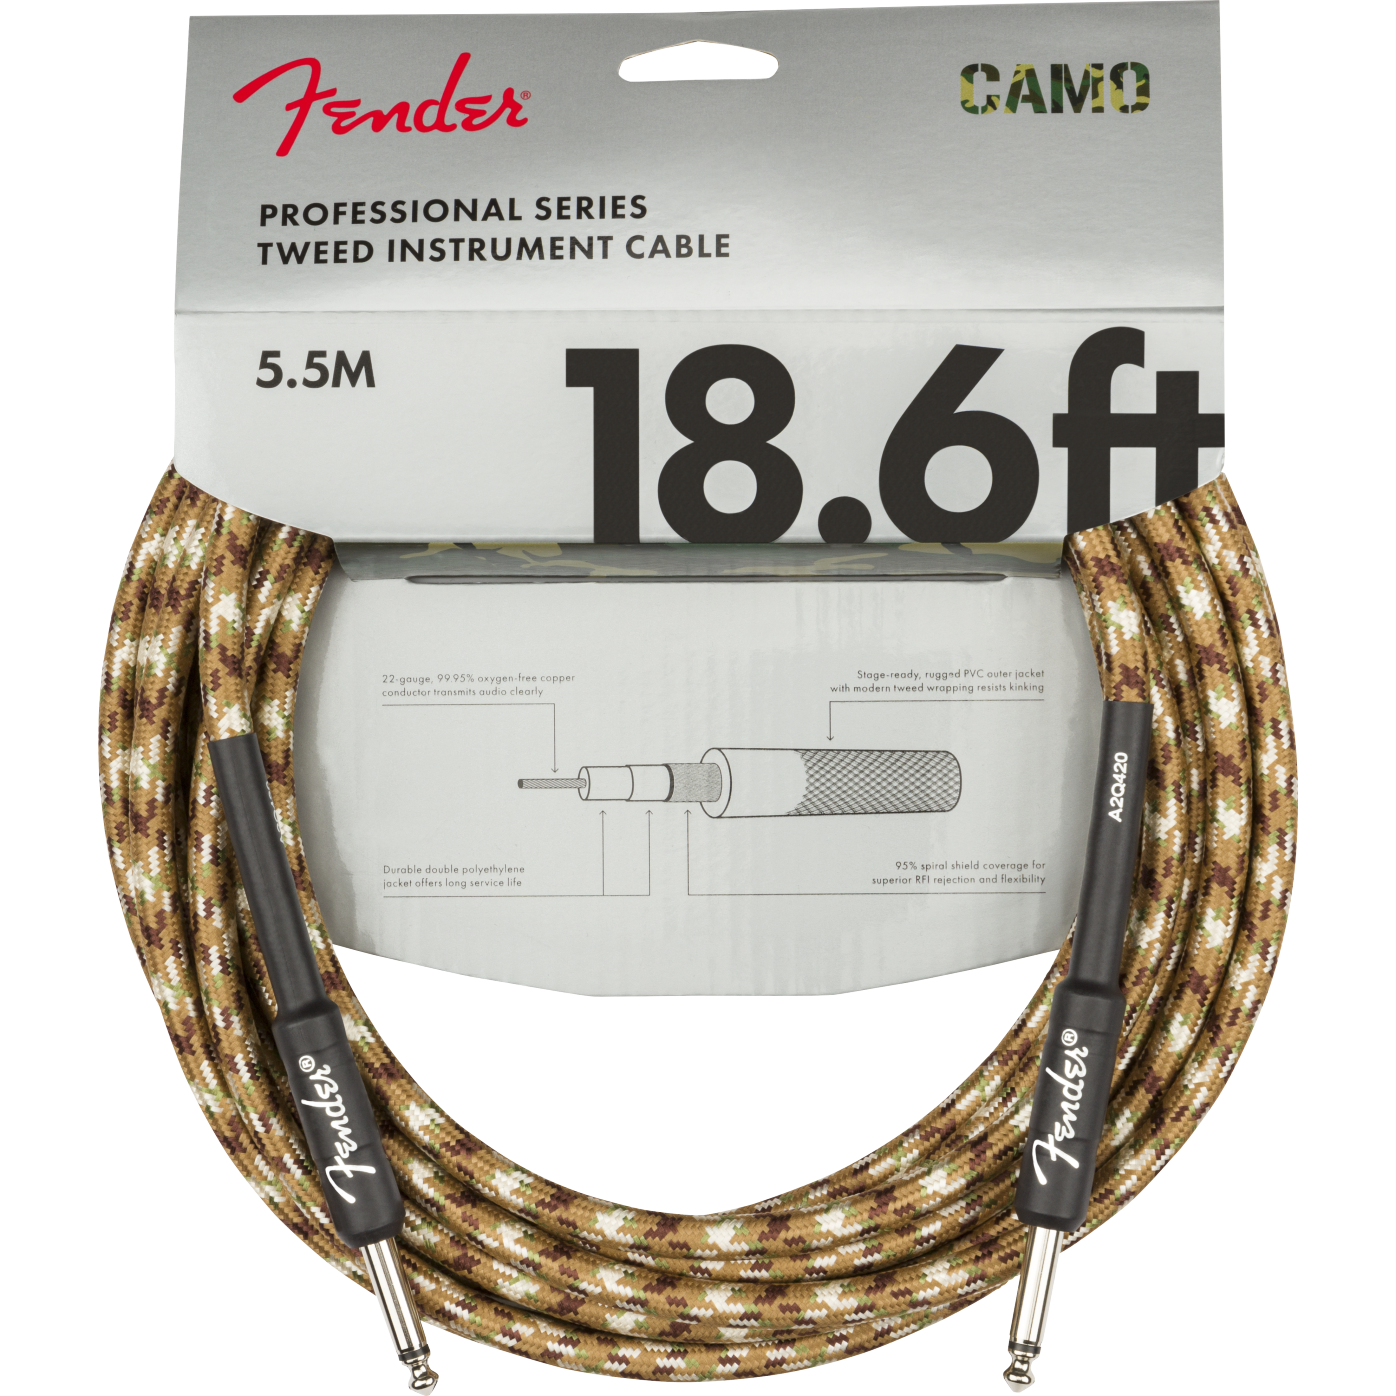 Fender Professional Series Cable, Camo 18.6ft